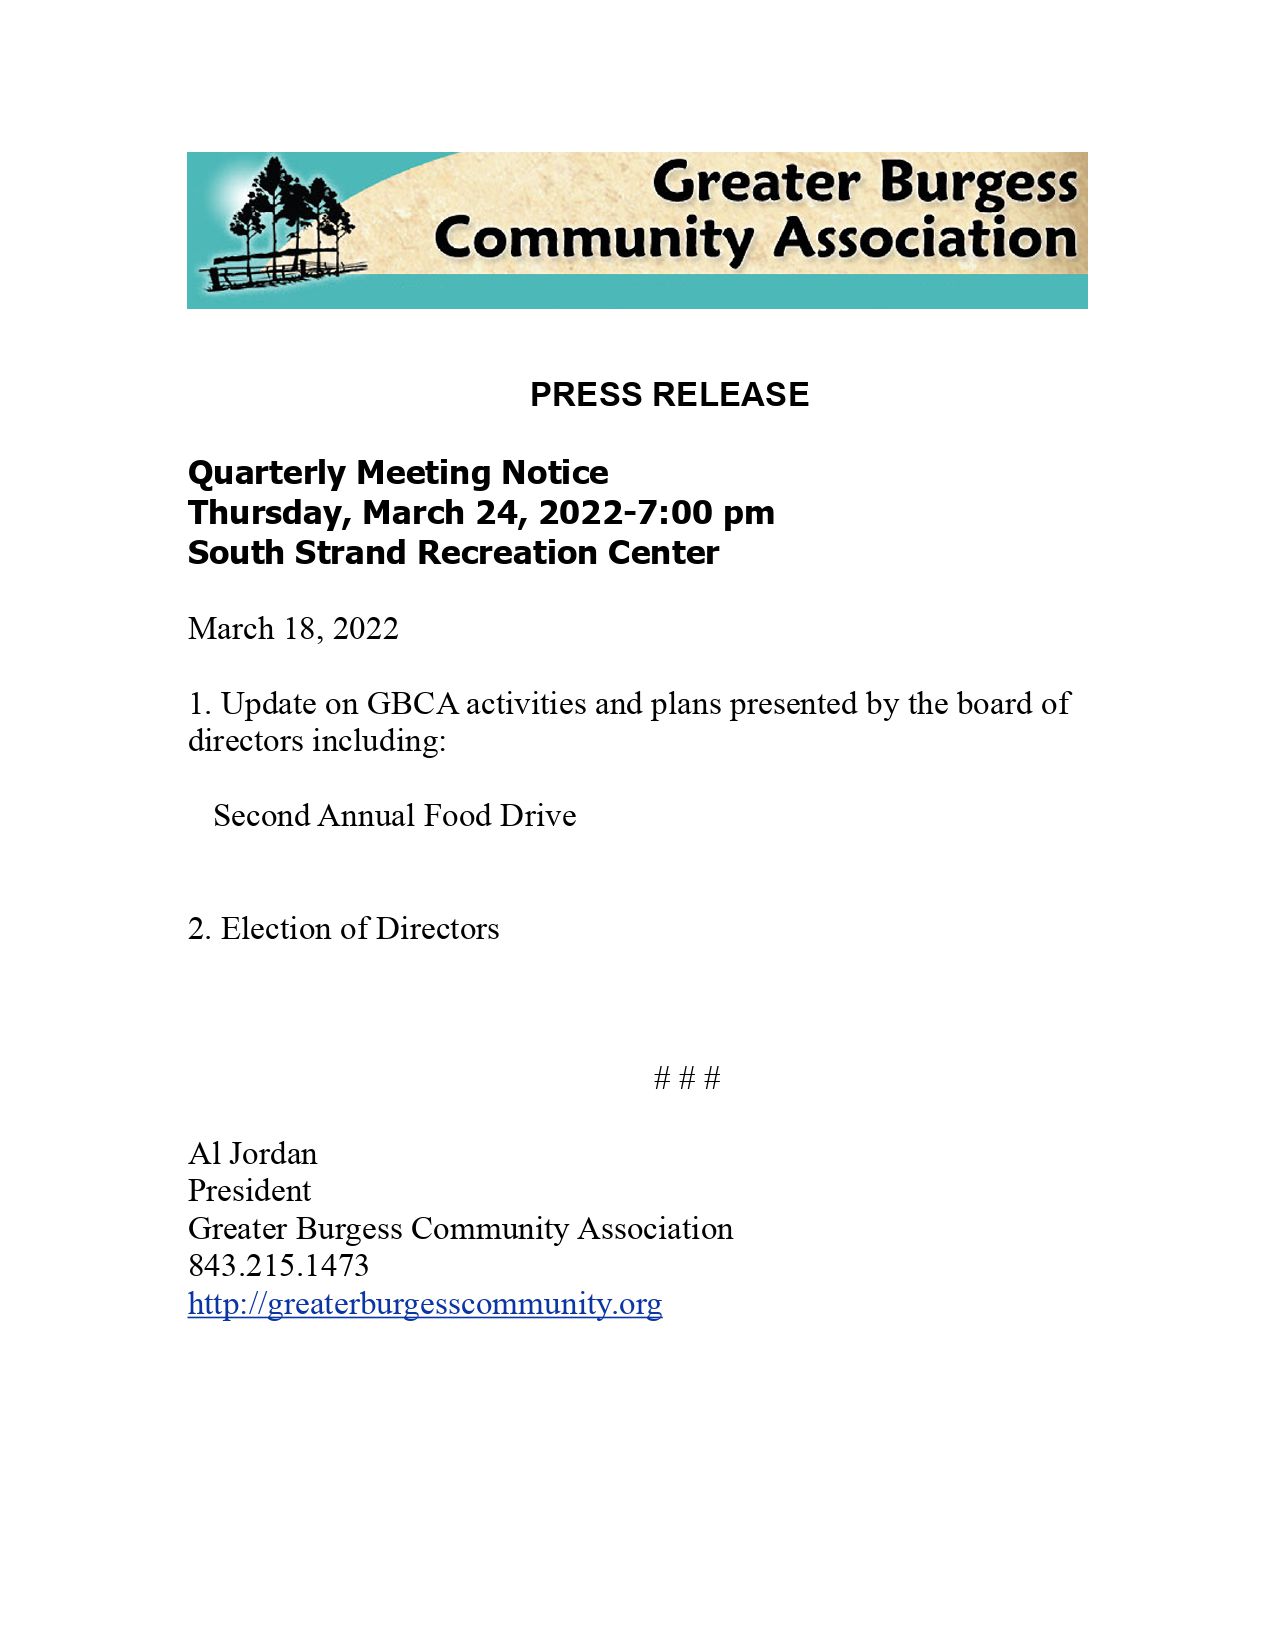 PRESS RELEASE 3 24 22 Quarterly Meeting 2